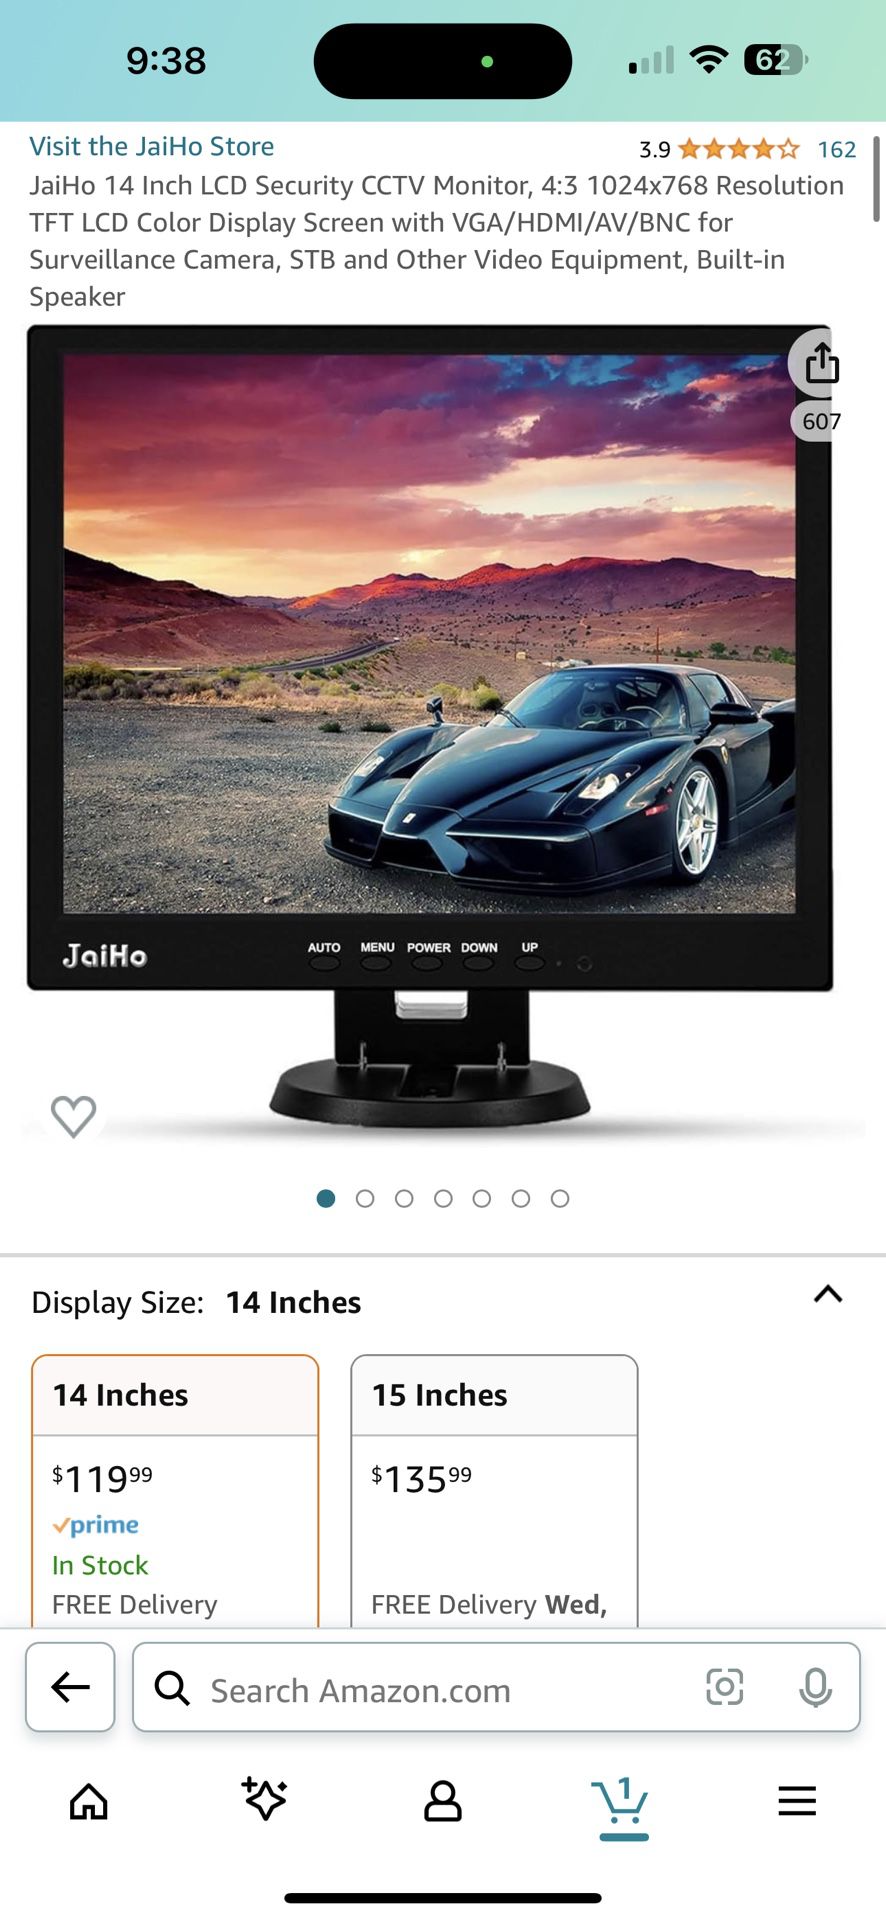 JaiHo 14 Inch LCD Security CCTV Monitor